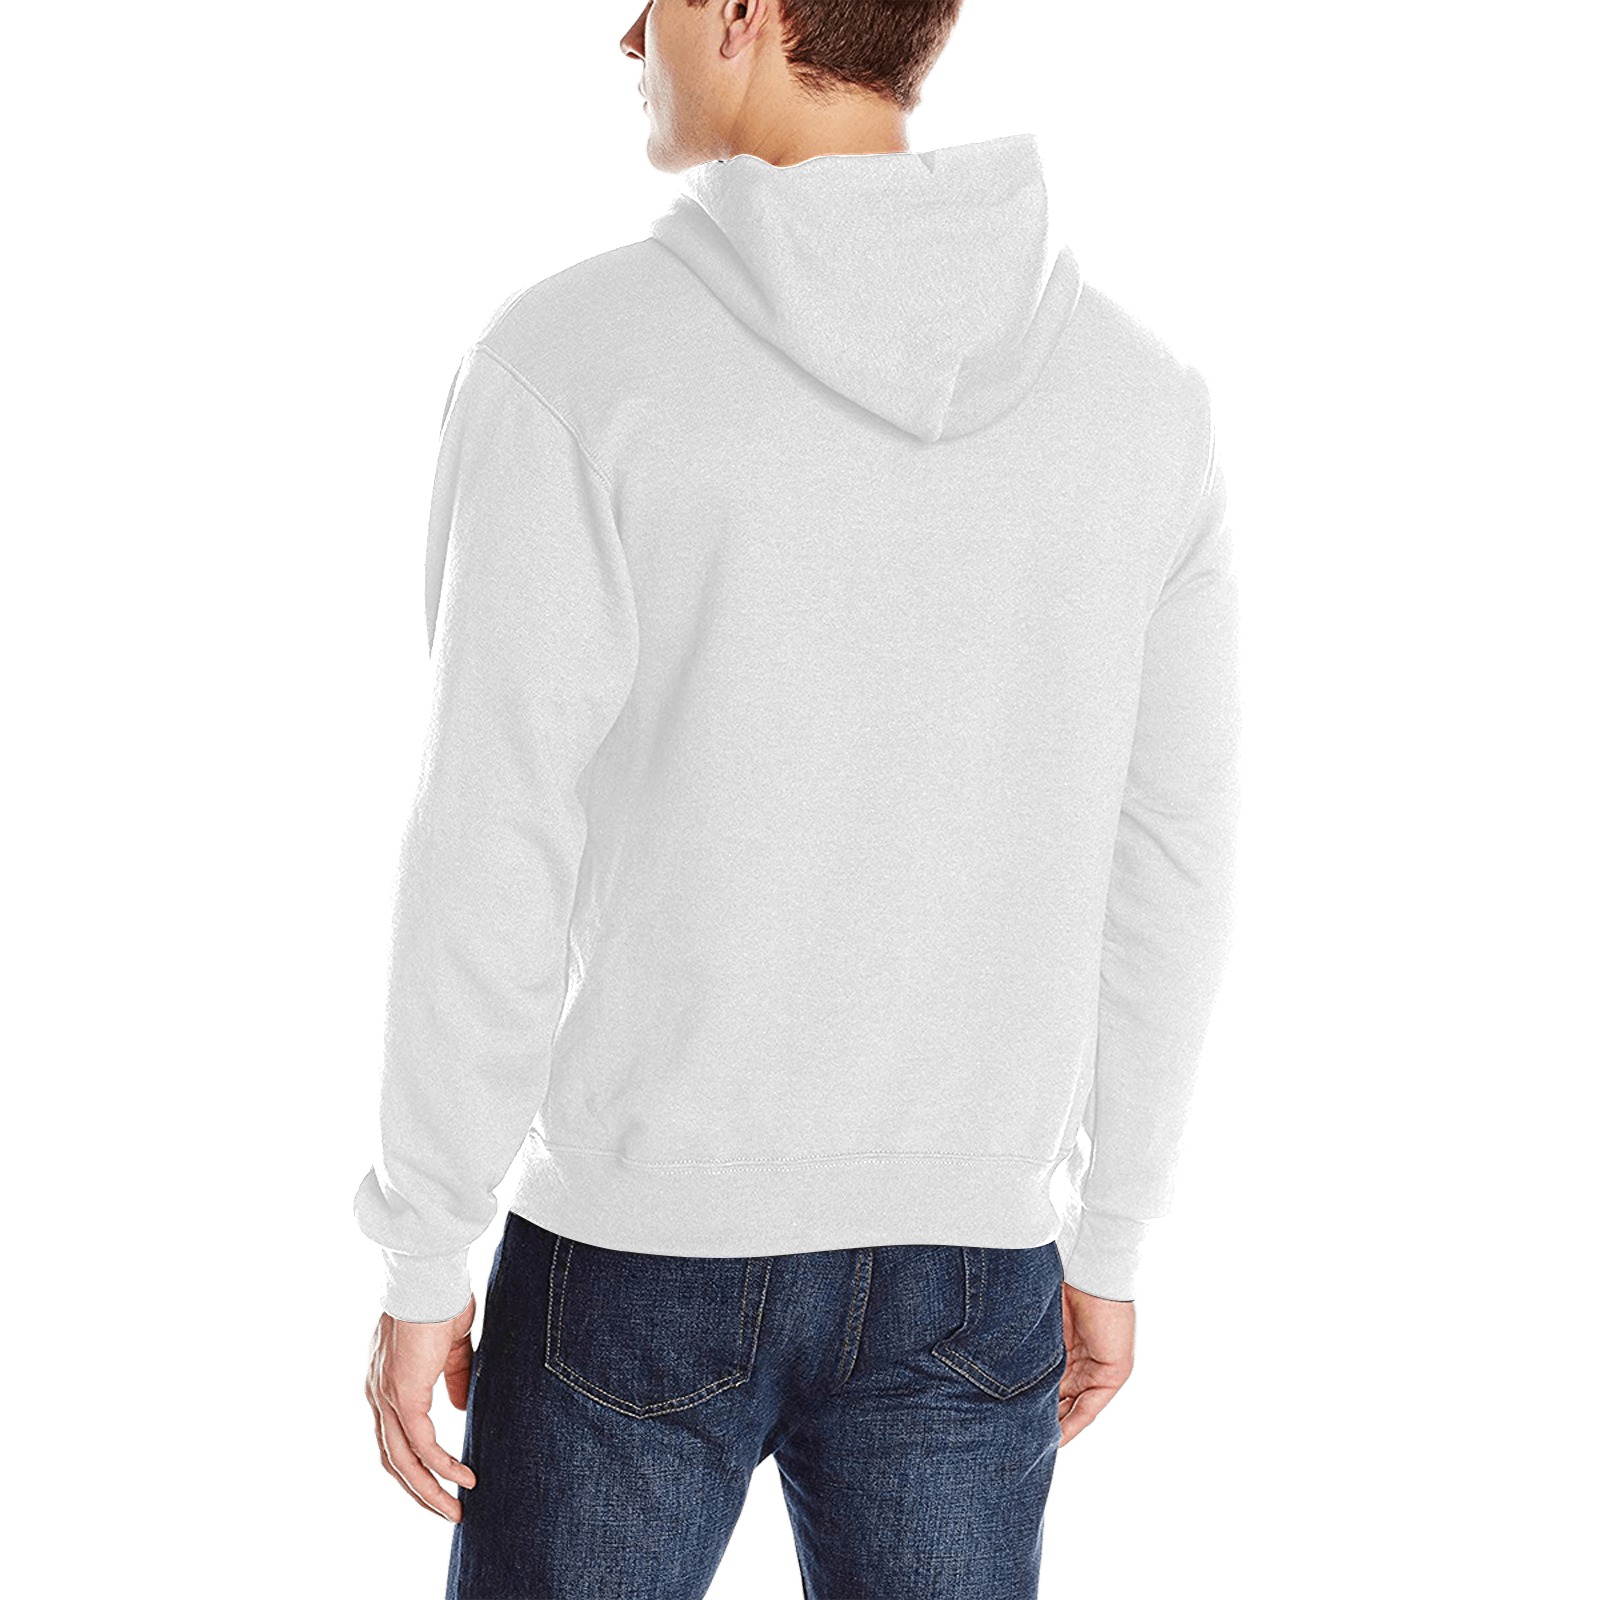 It's A Pride Thing You Wouldn't Understand Men's Classic Hoodie (Model H17)